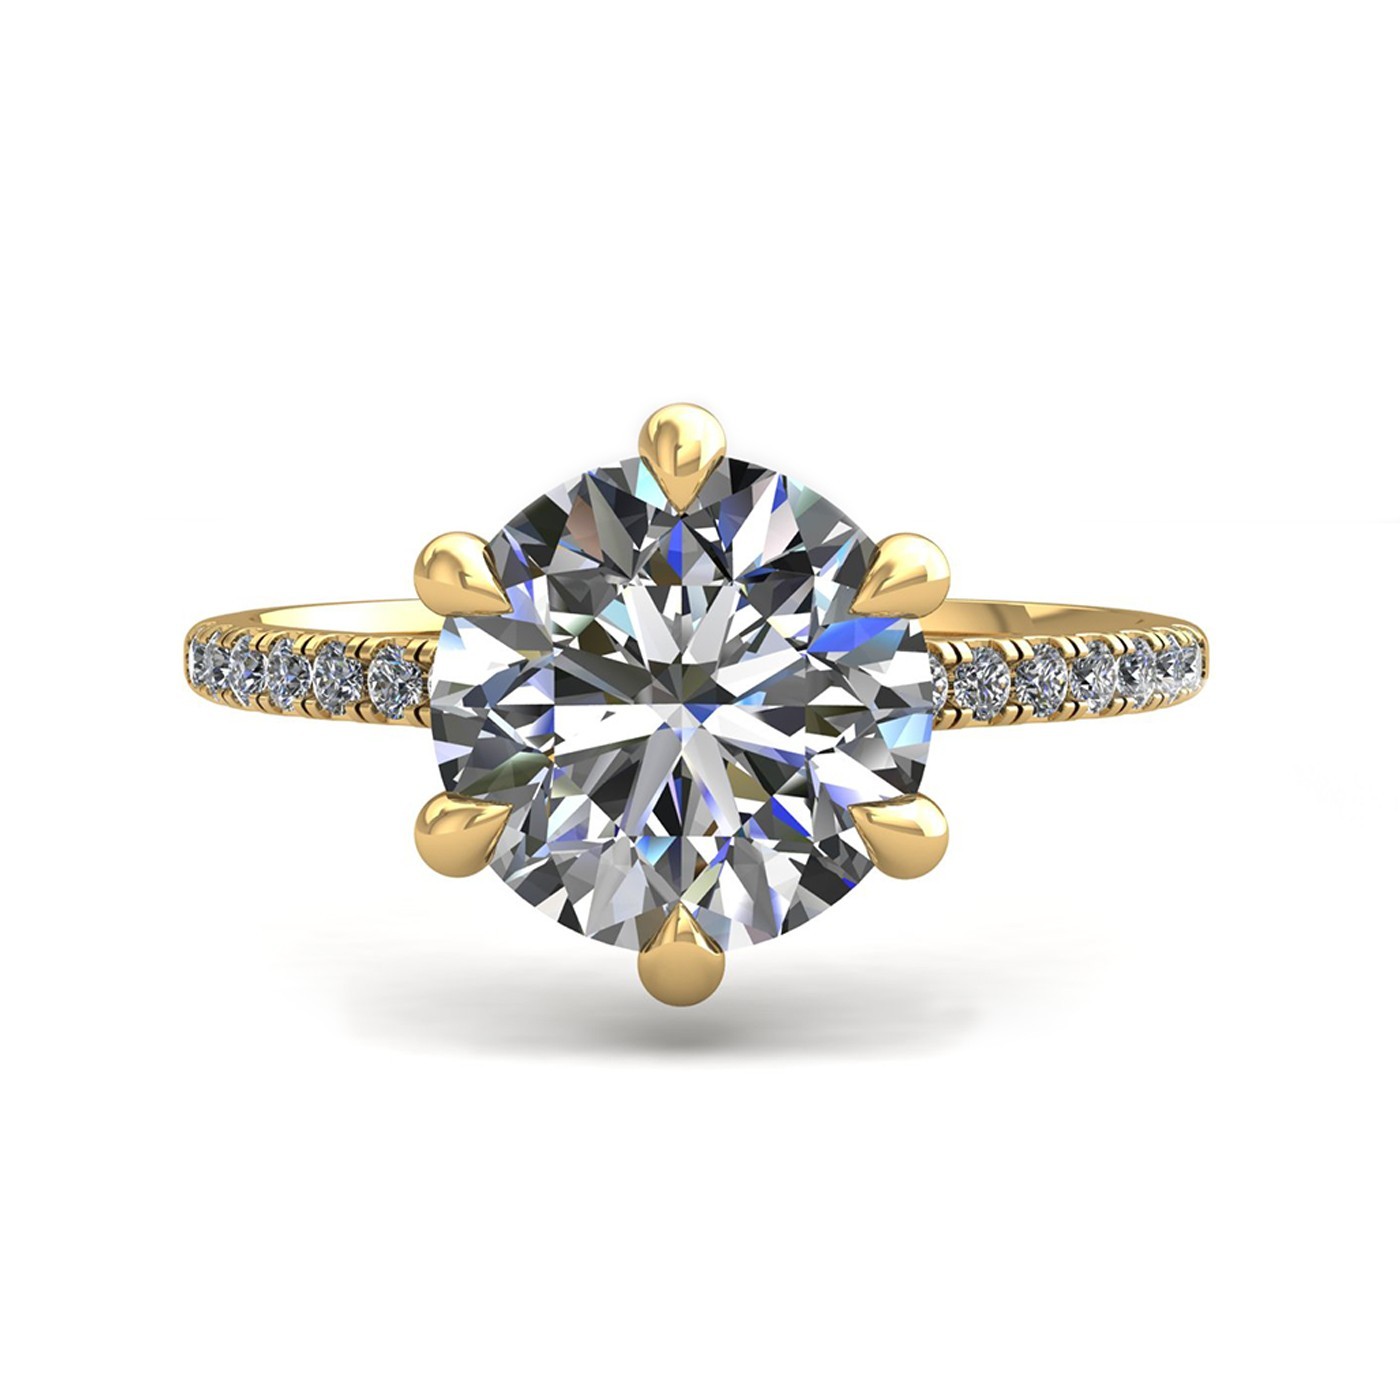 18k yellow gold 2,50 ct 6 prongs round cut diamond engagement ring with whisper thin pavÉ set band Photos & images